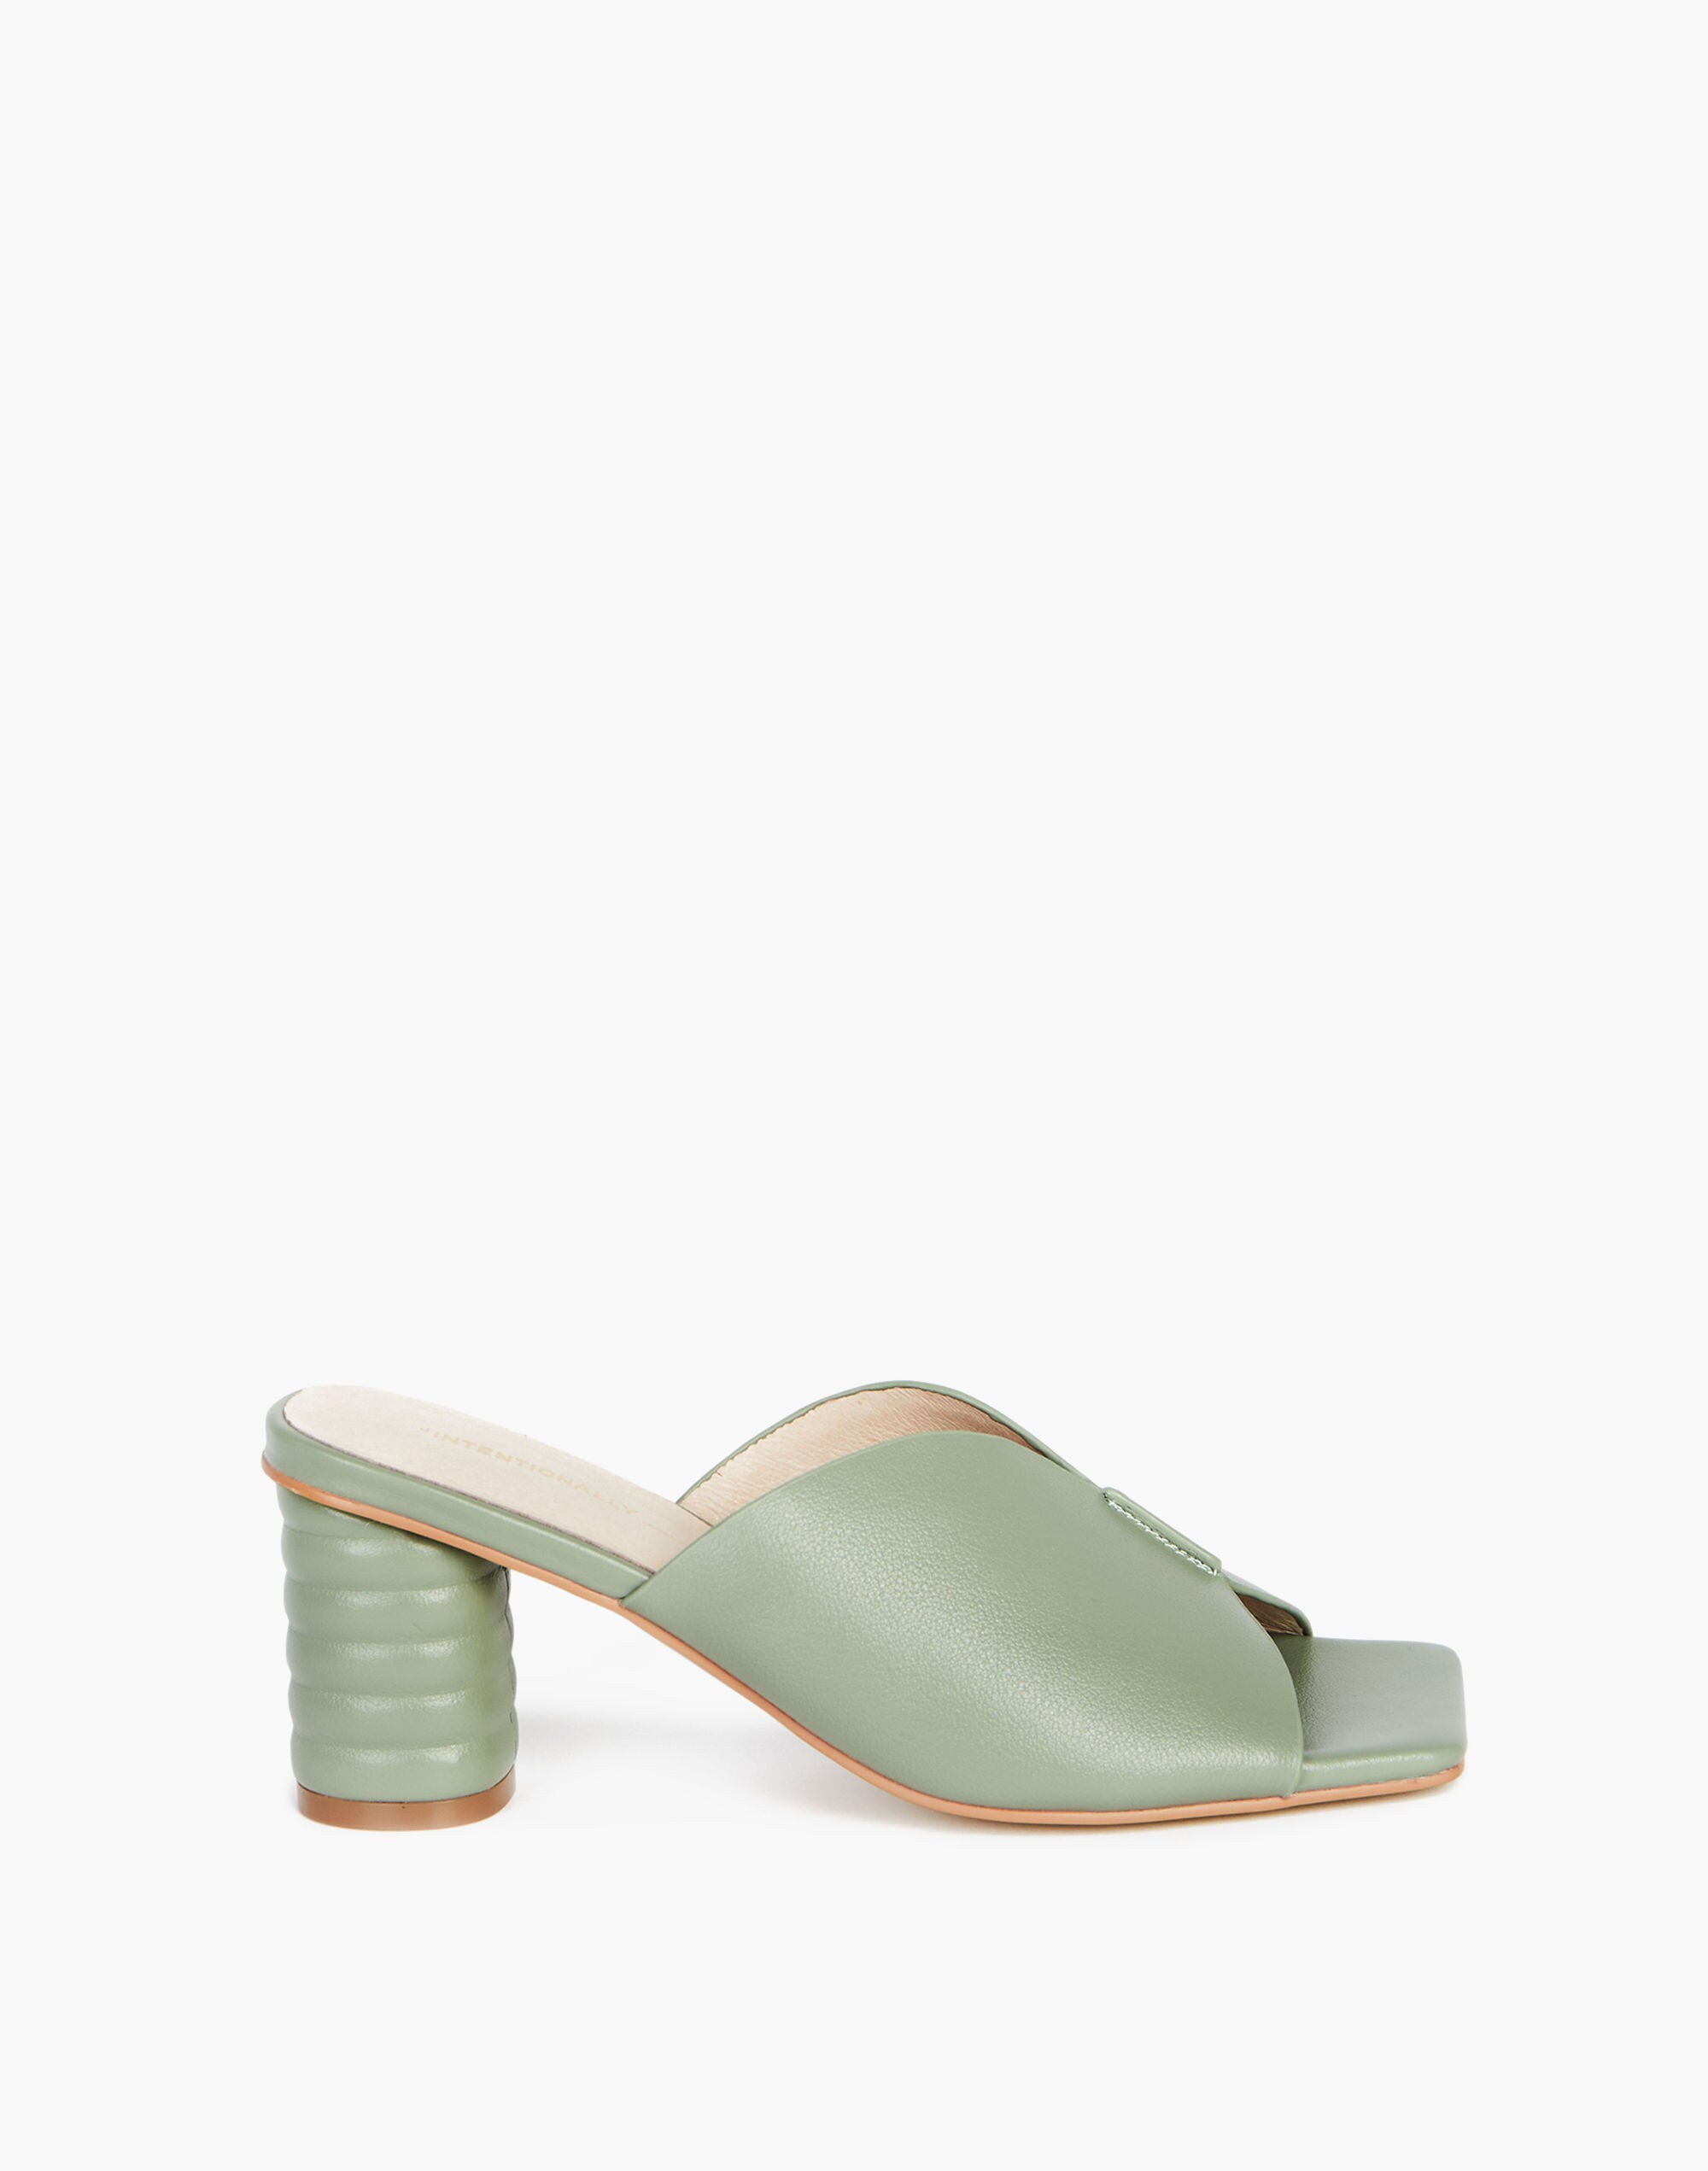 Intentionally Blank Leather Kamika Mules in Sage